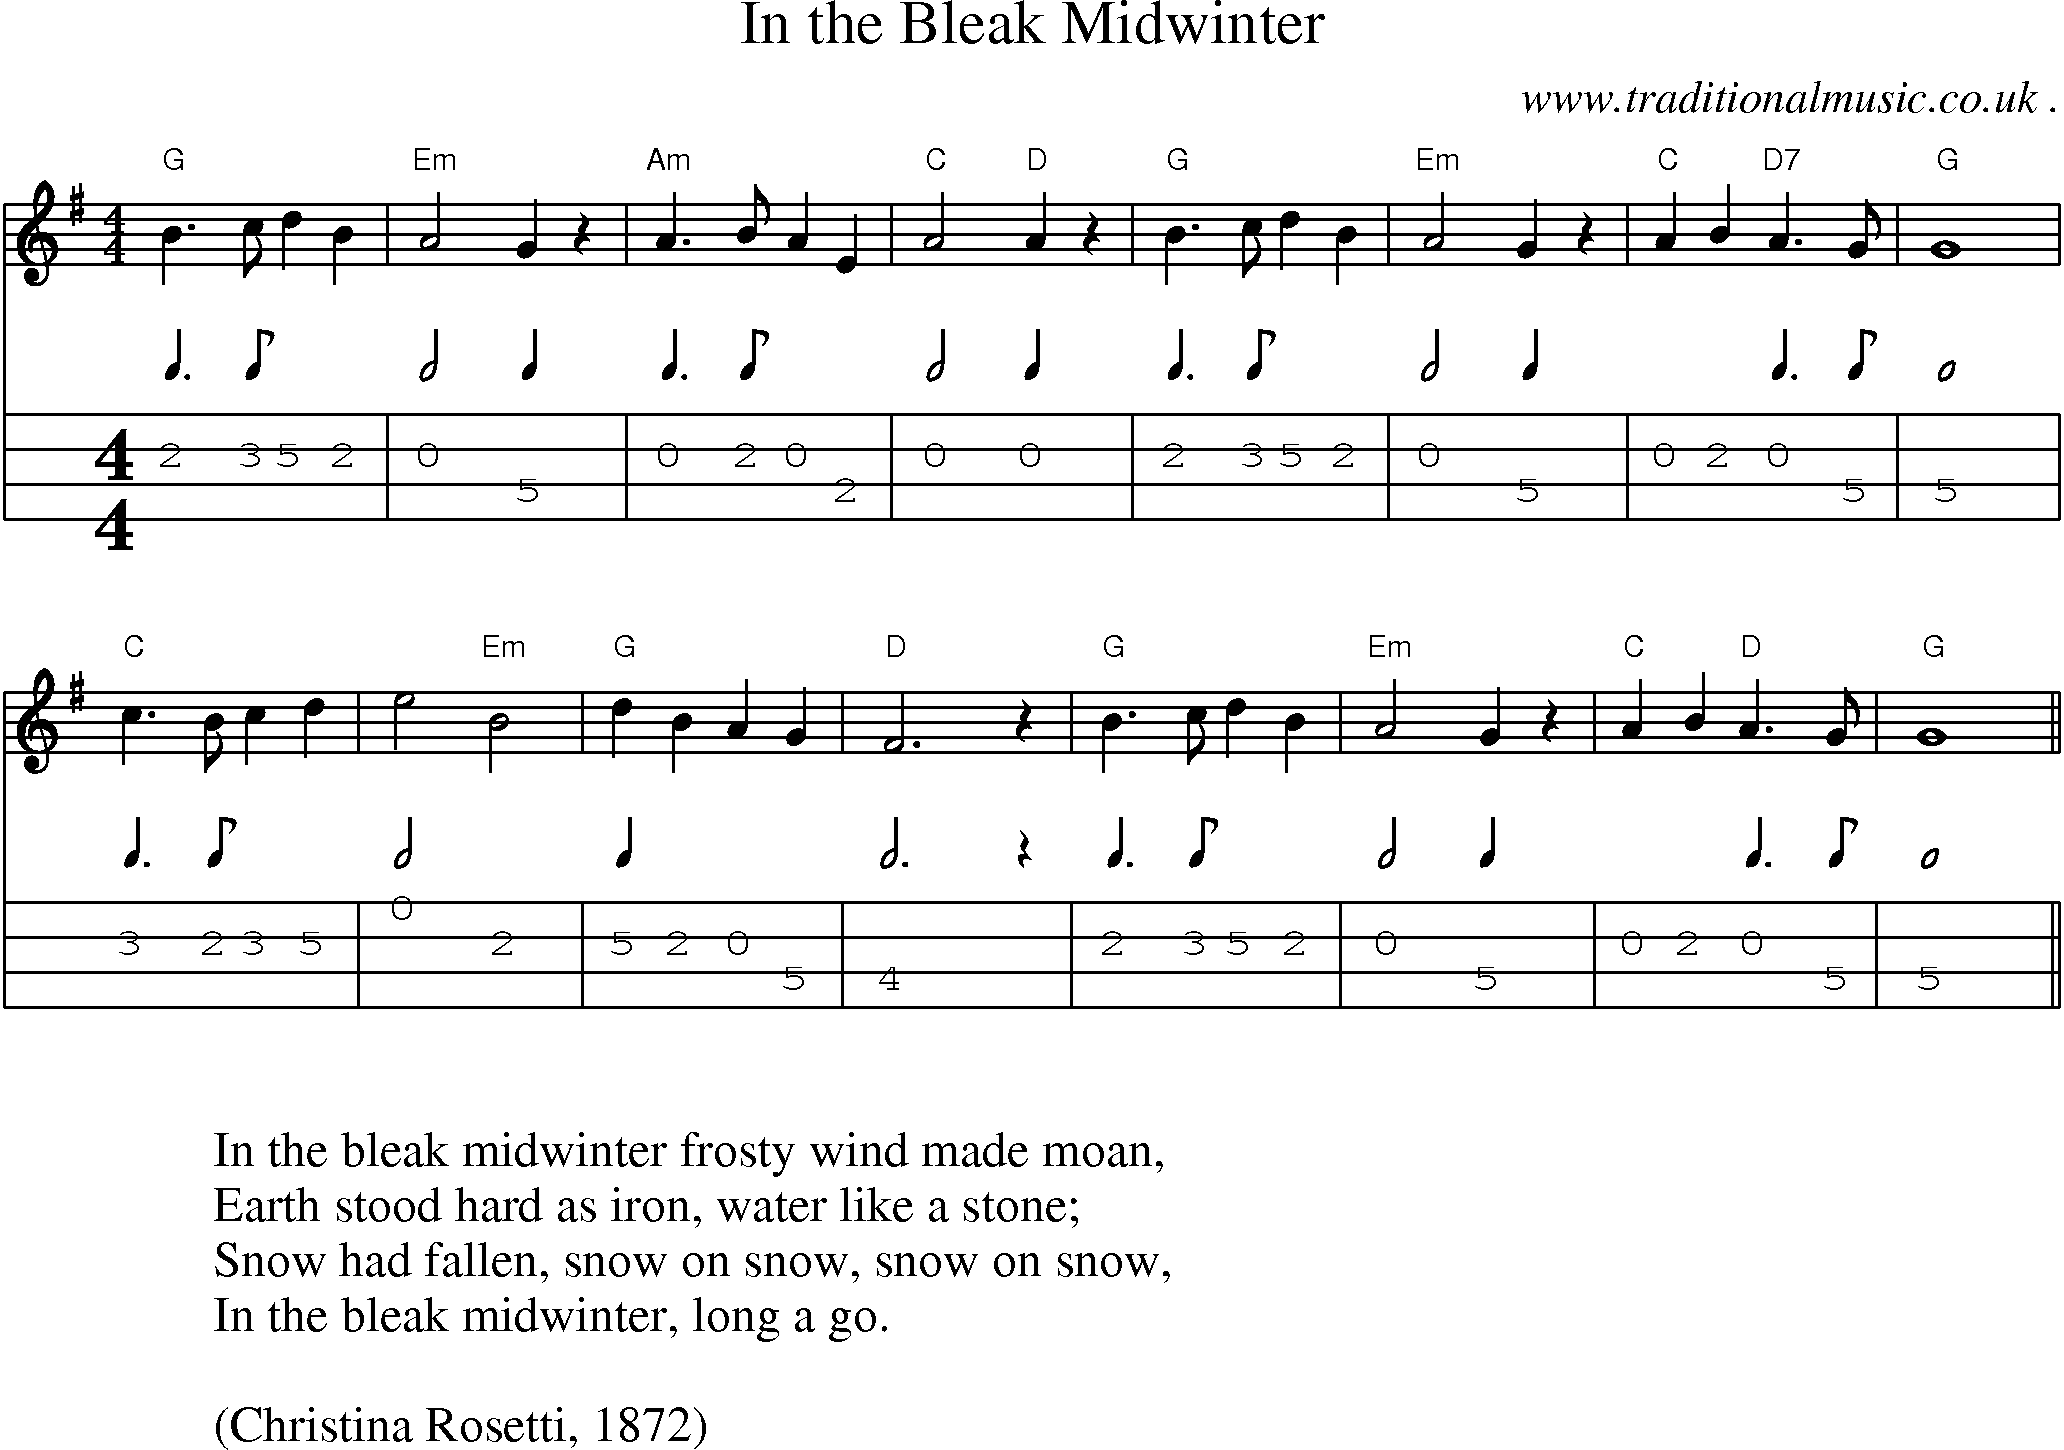 Music Score and Guitar Tabs for In the Bleak Midwinter